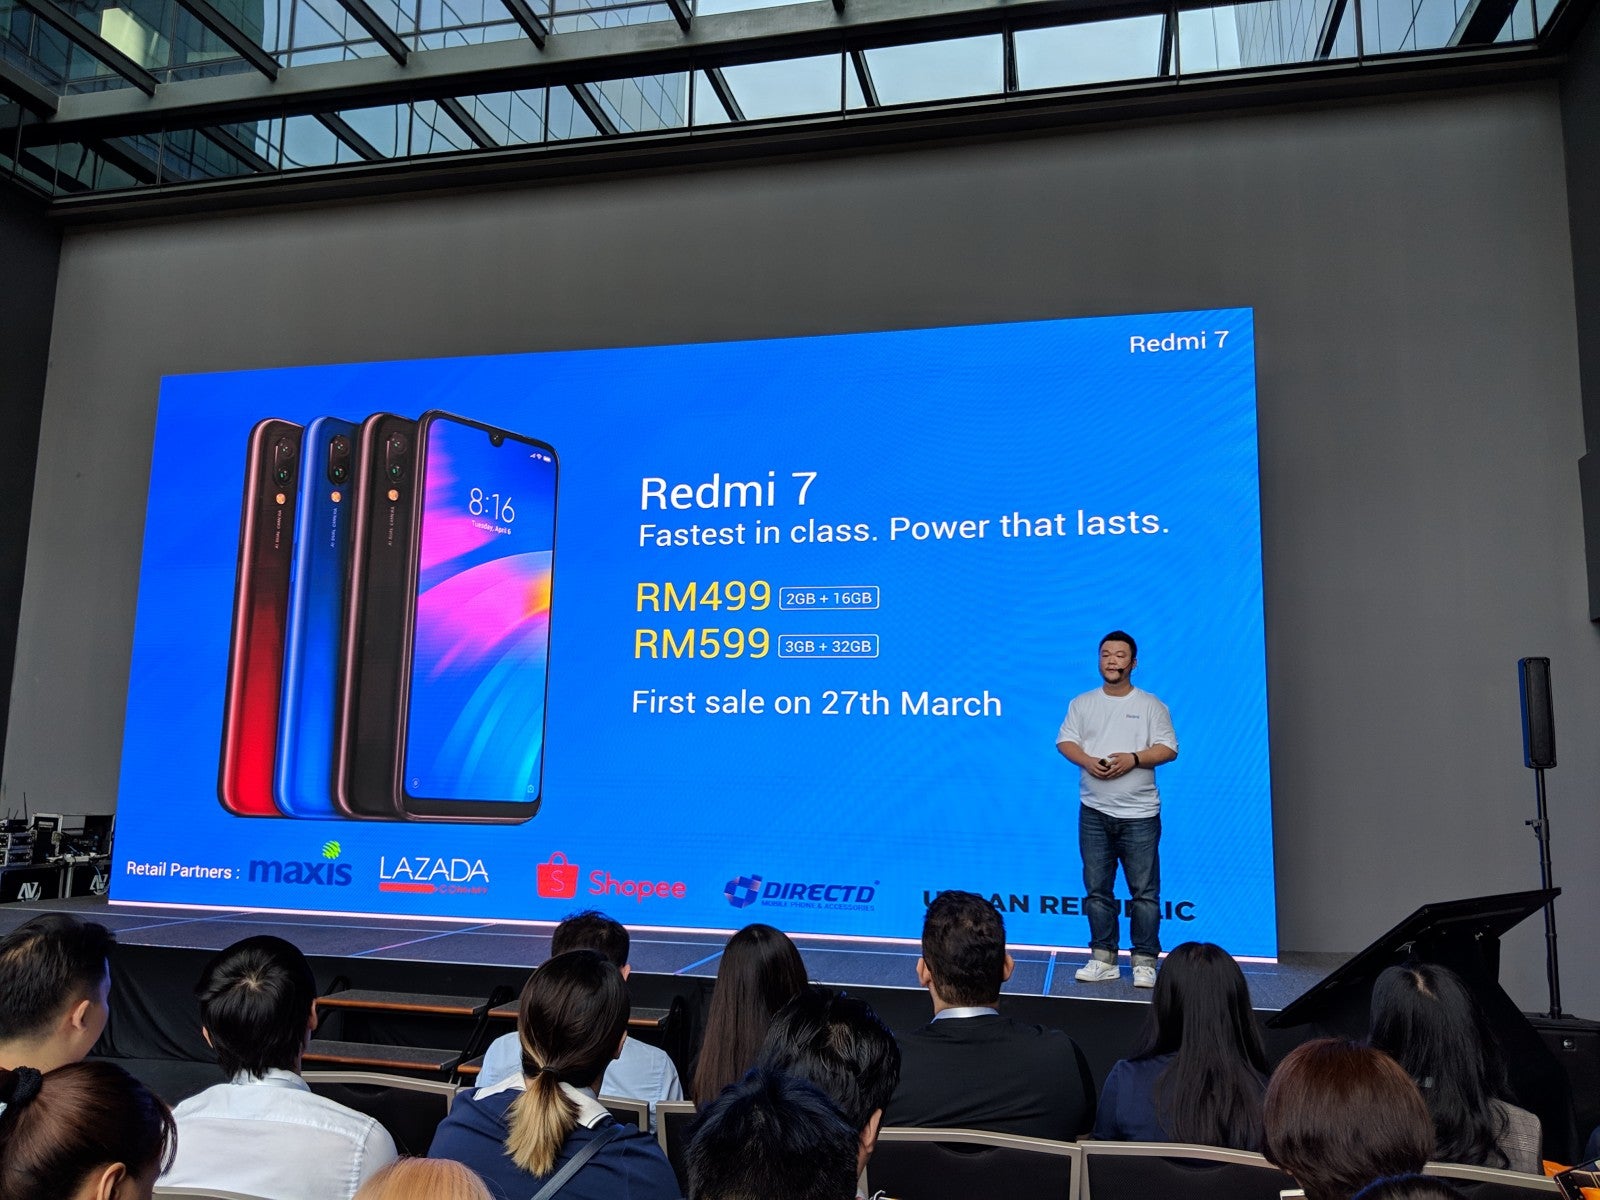 This New Redmi Phone Has a 48MP Camera, 4000mAH Battery, and Costs Only RM679! - WORLD OF BUZZ 4